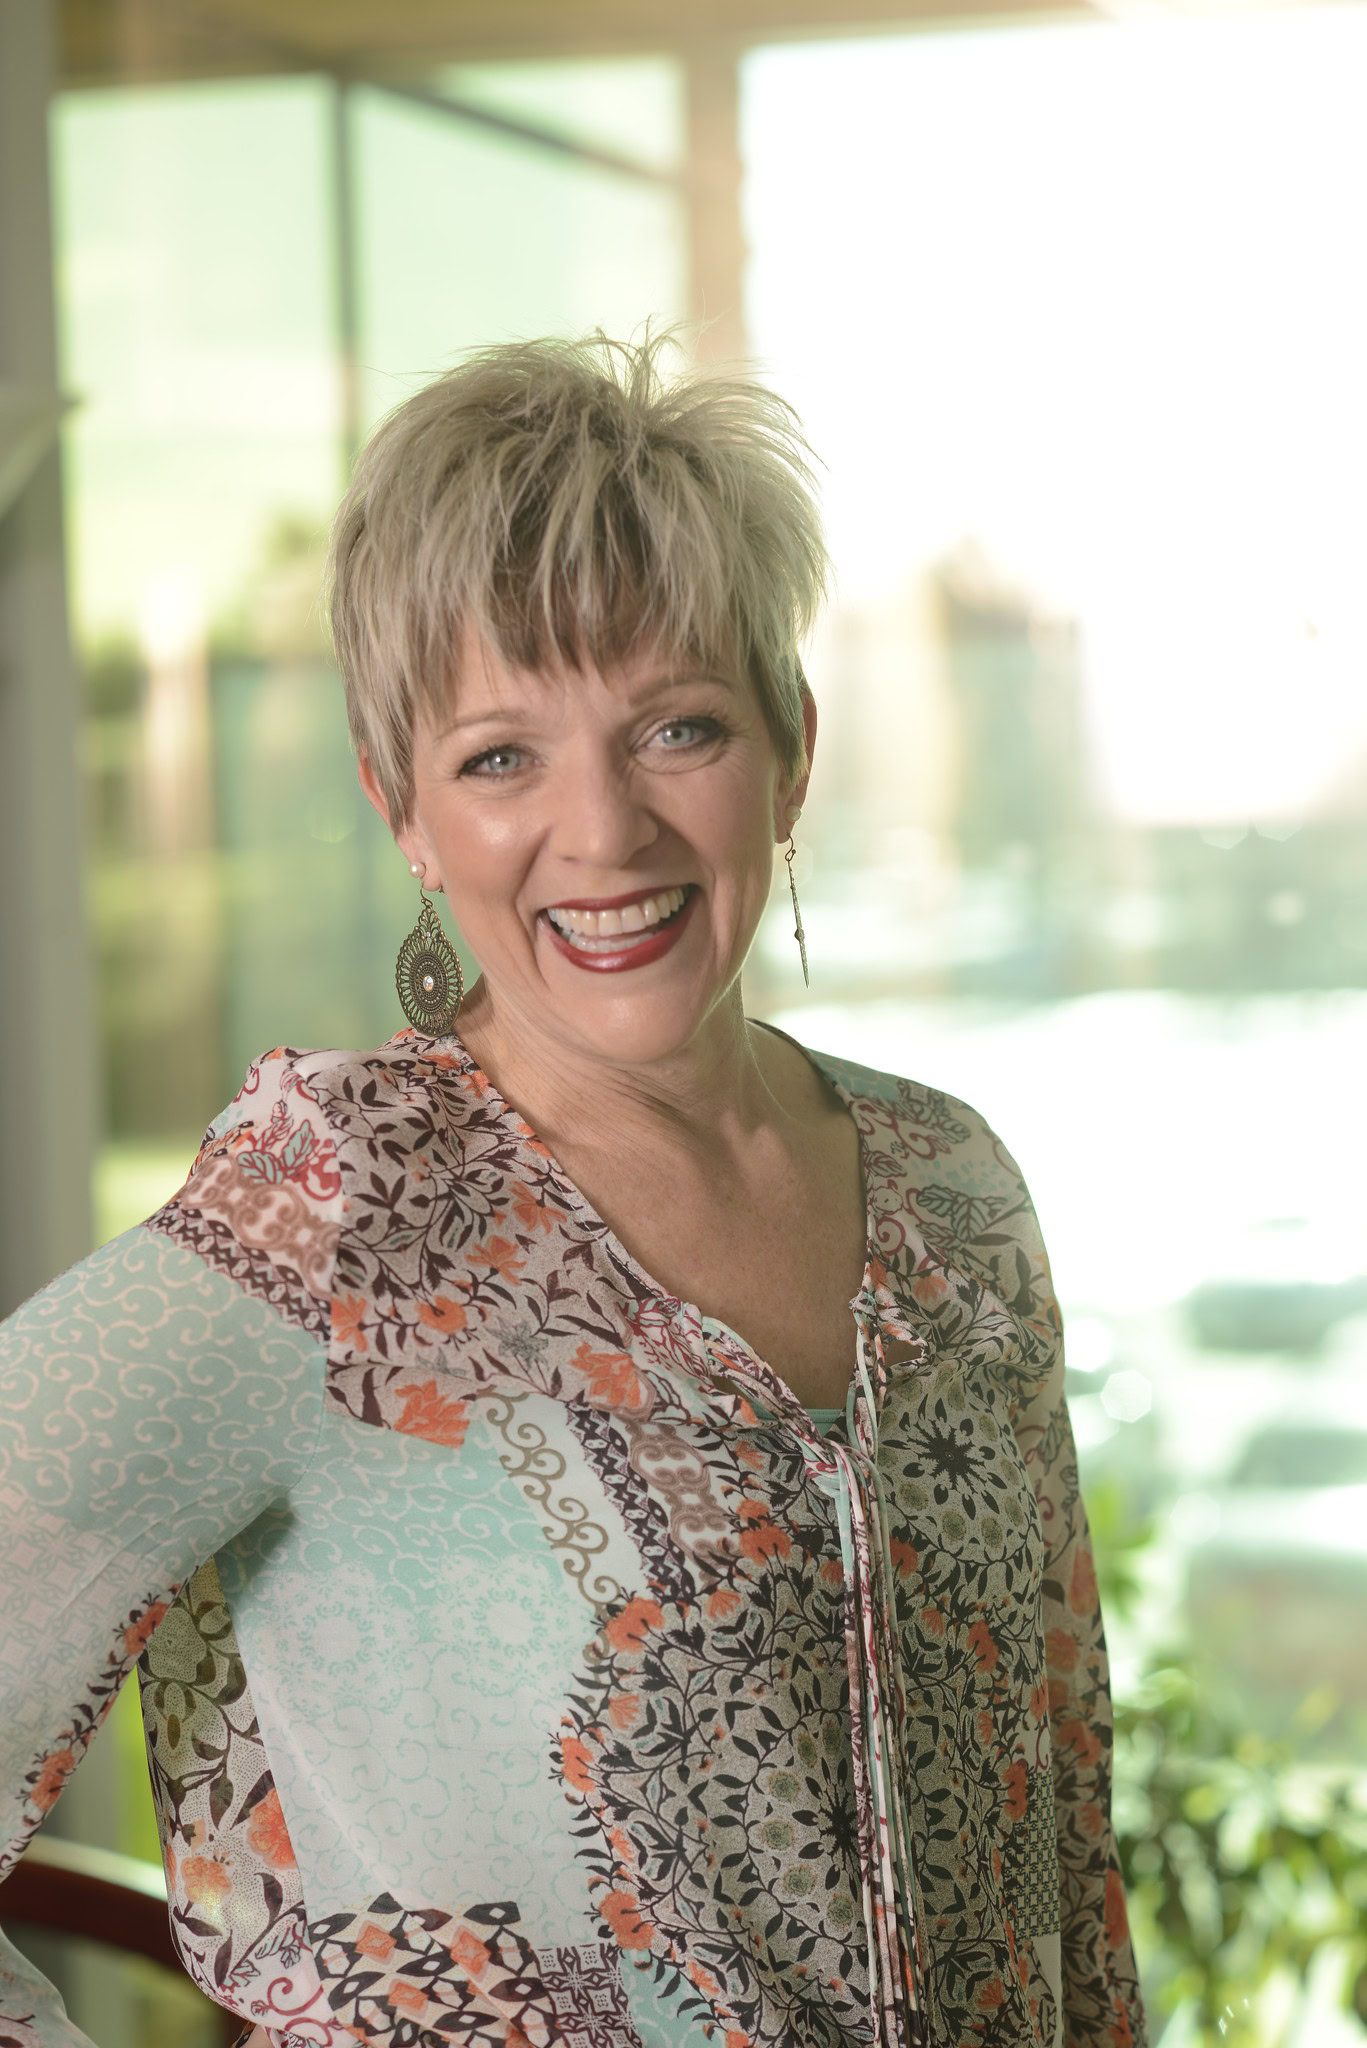 Dr. Kris smiling person with short blonde hair, wearing a patterned blouse and earrings, stands in a bright room with large windows, embracing functional medicine.